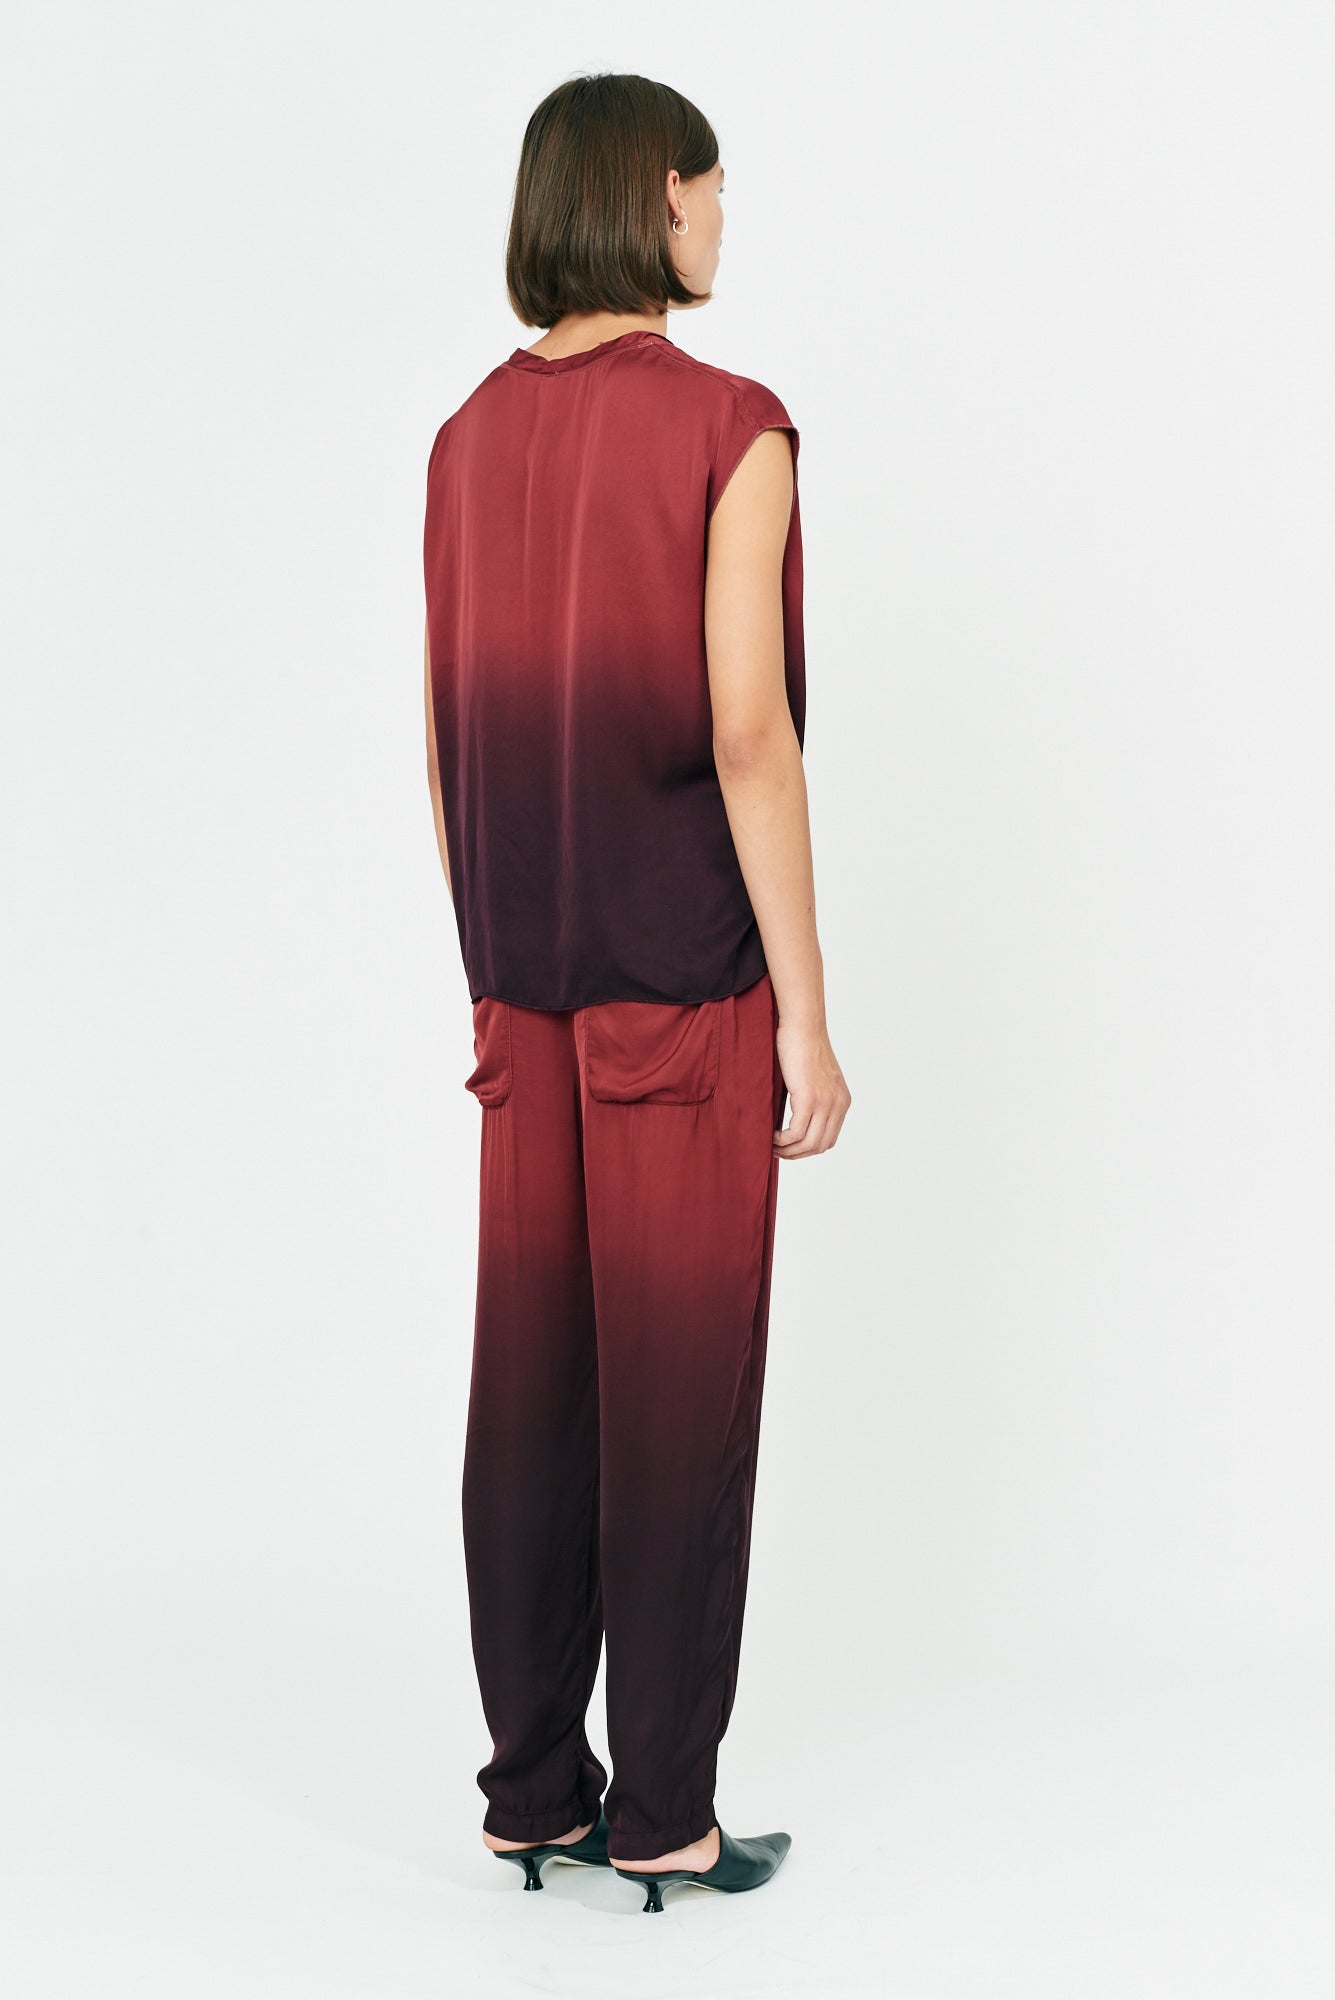 Sienna Gradient Ghost Ranch Matte Satin Pop Over Top RA-TOP ARCHIVE-FALL2'22   